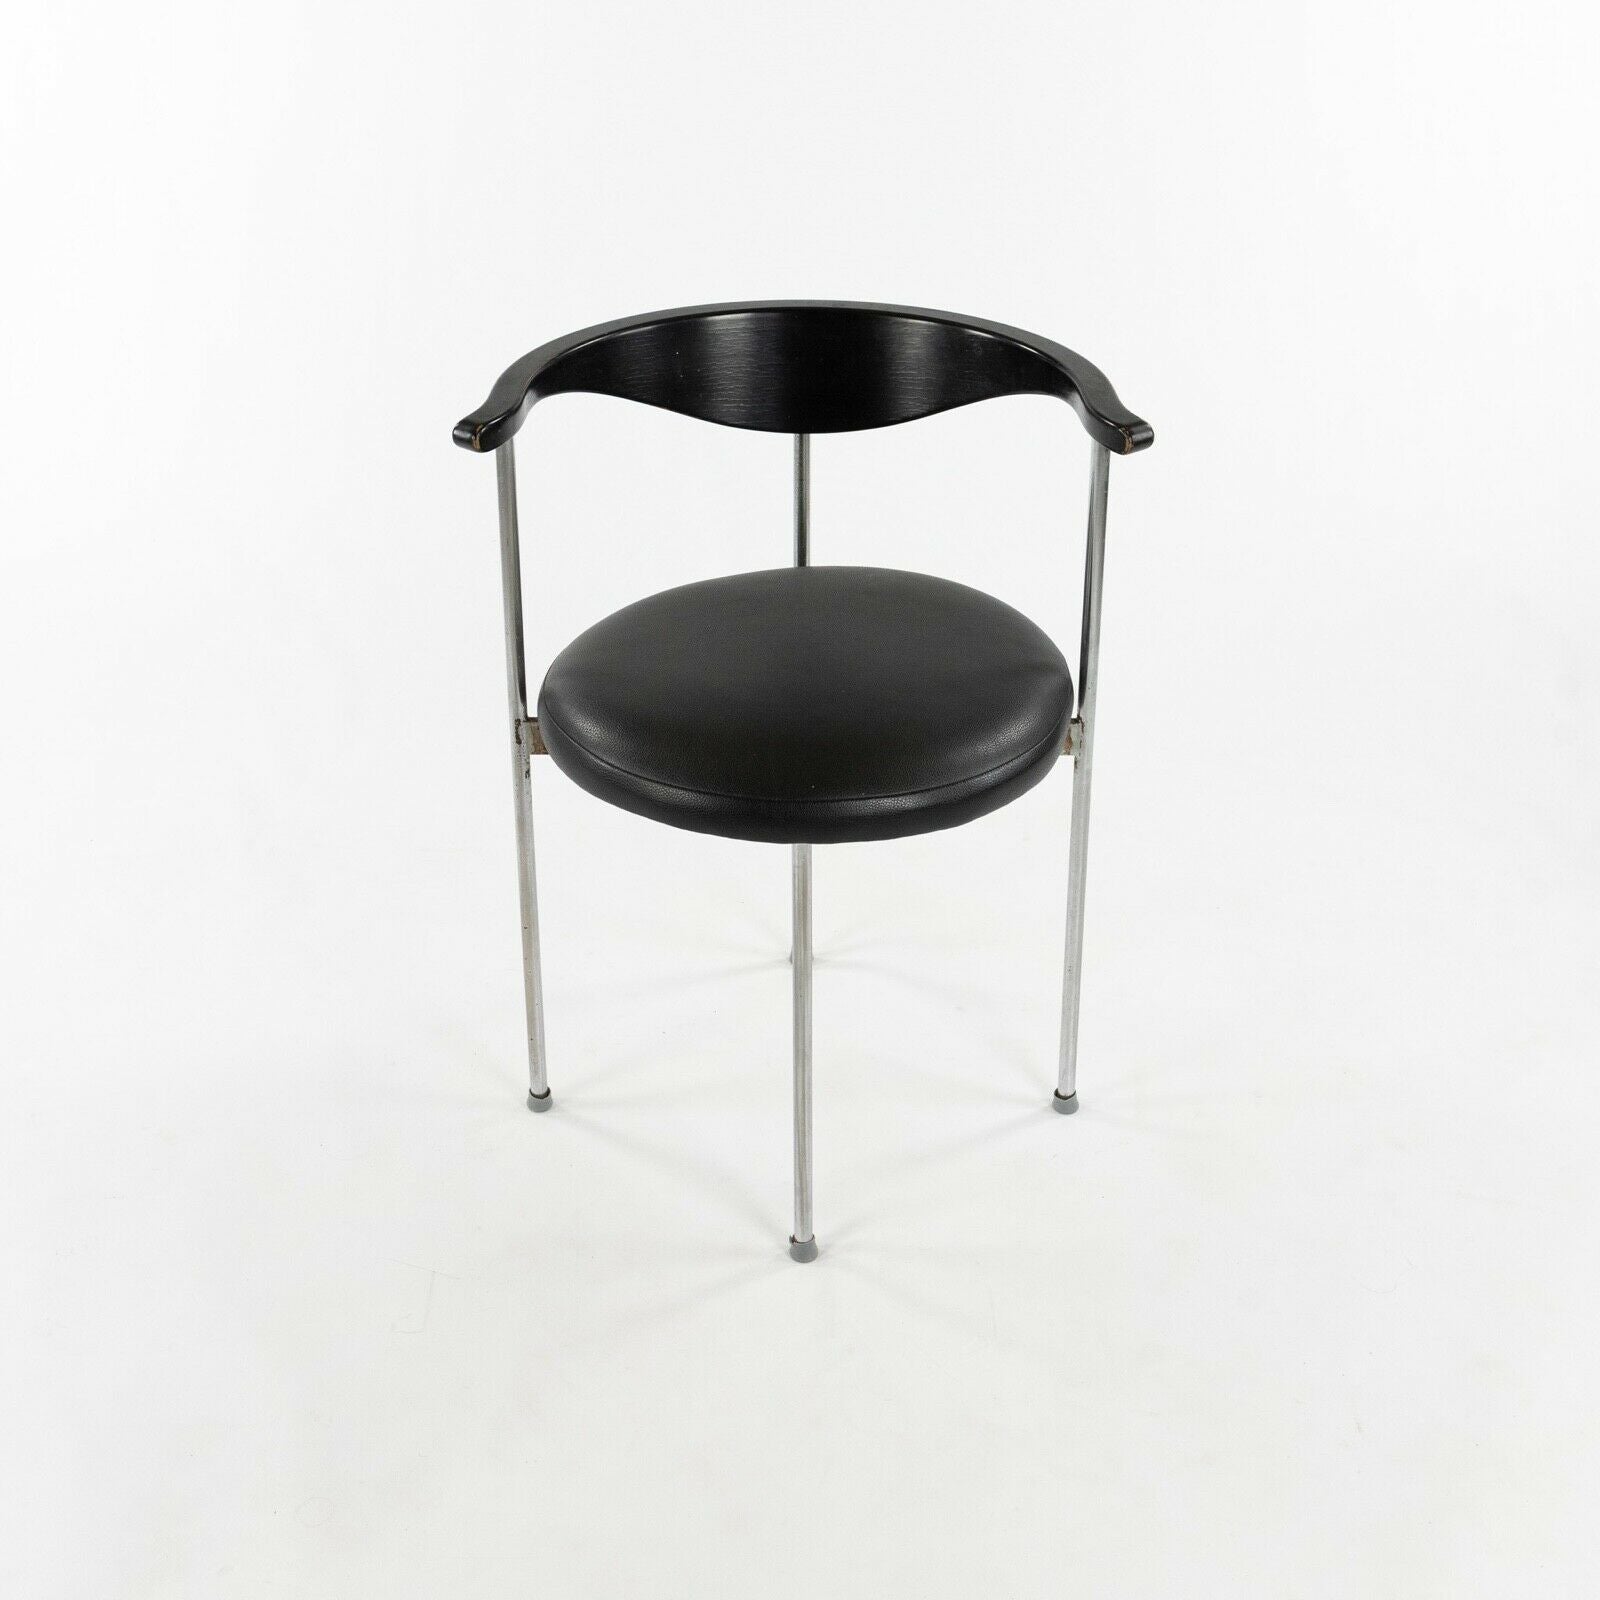 1963 Frederik Sieck for Fritz Hansen 3200 Dining Chairs + Arne Jacobsen A623 Dining Table